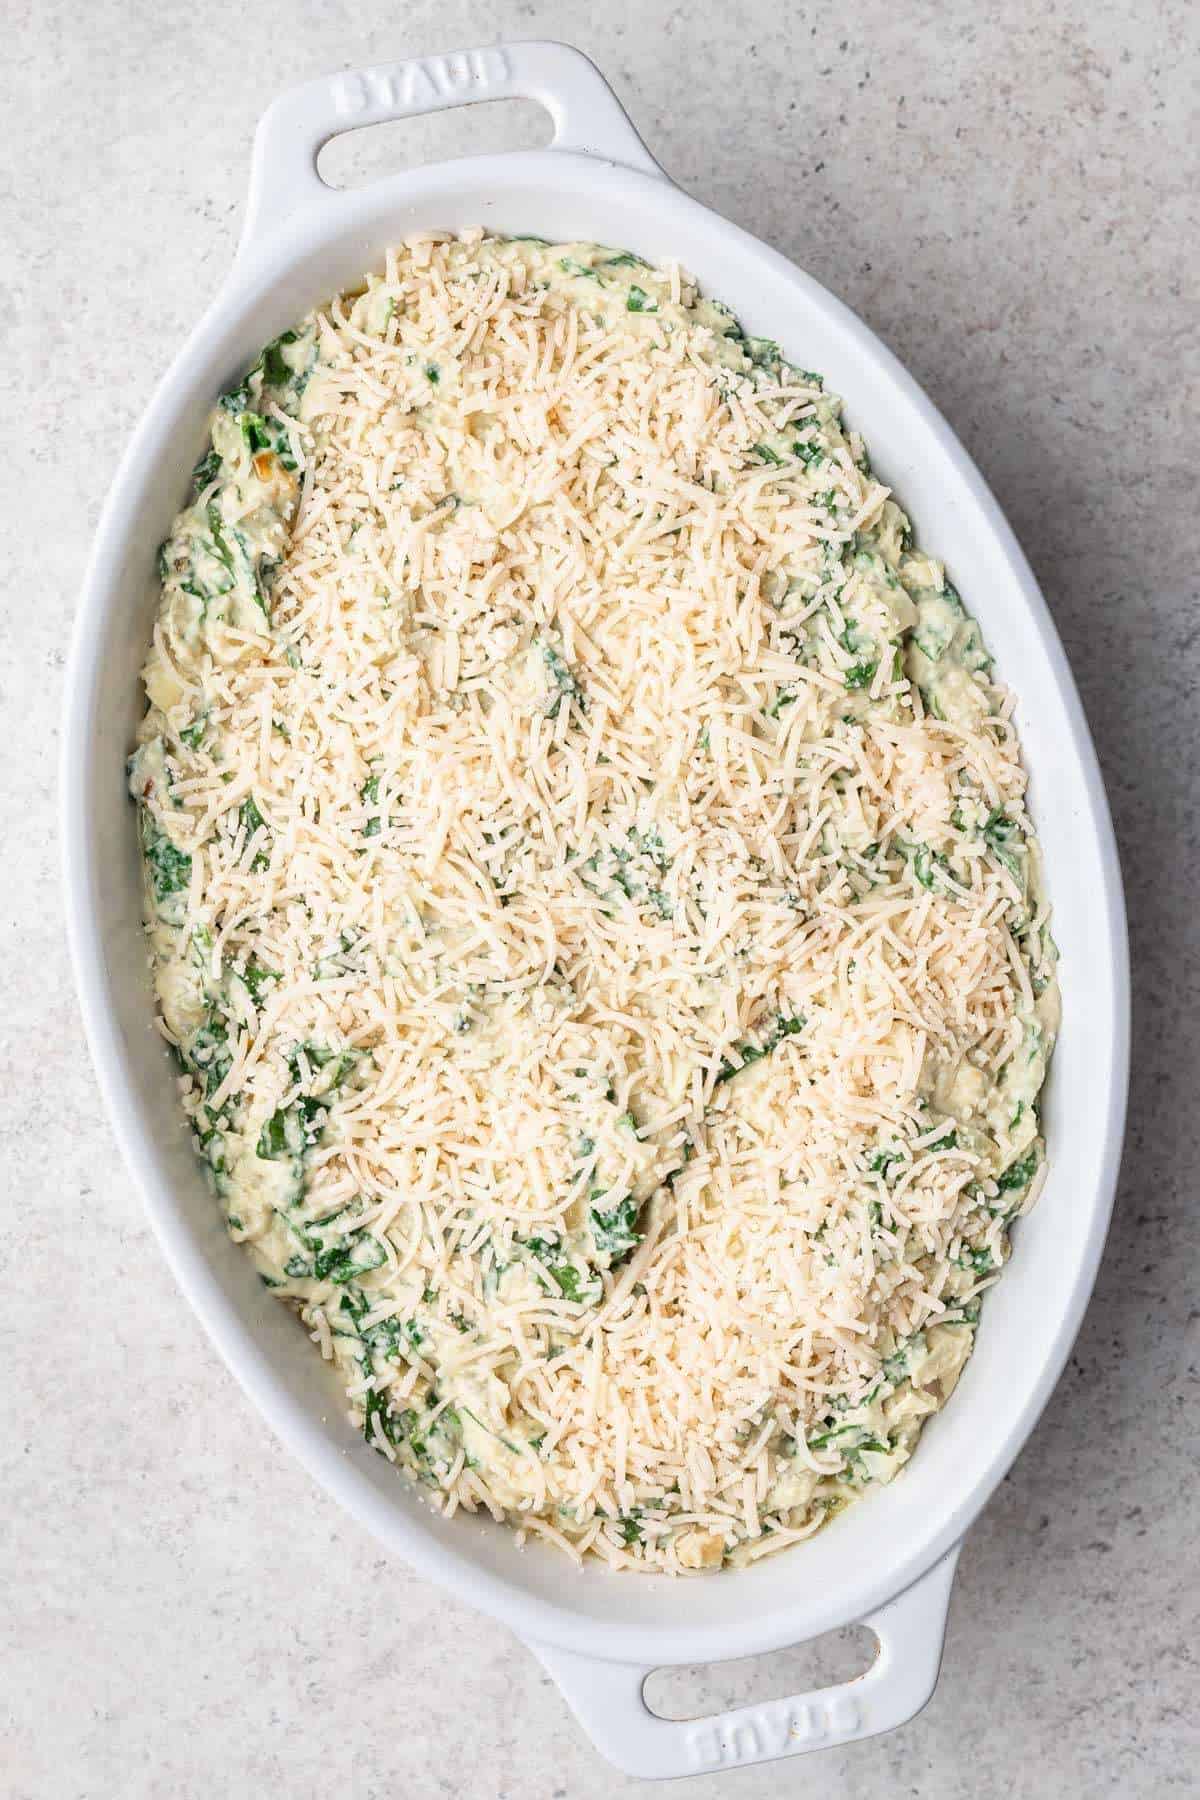 Dip transferred to baking dish and sprinkled with plant-based cheese.